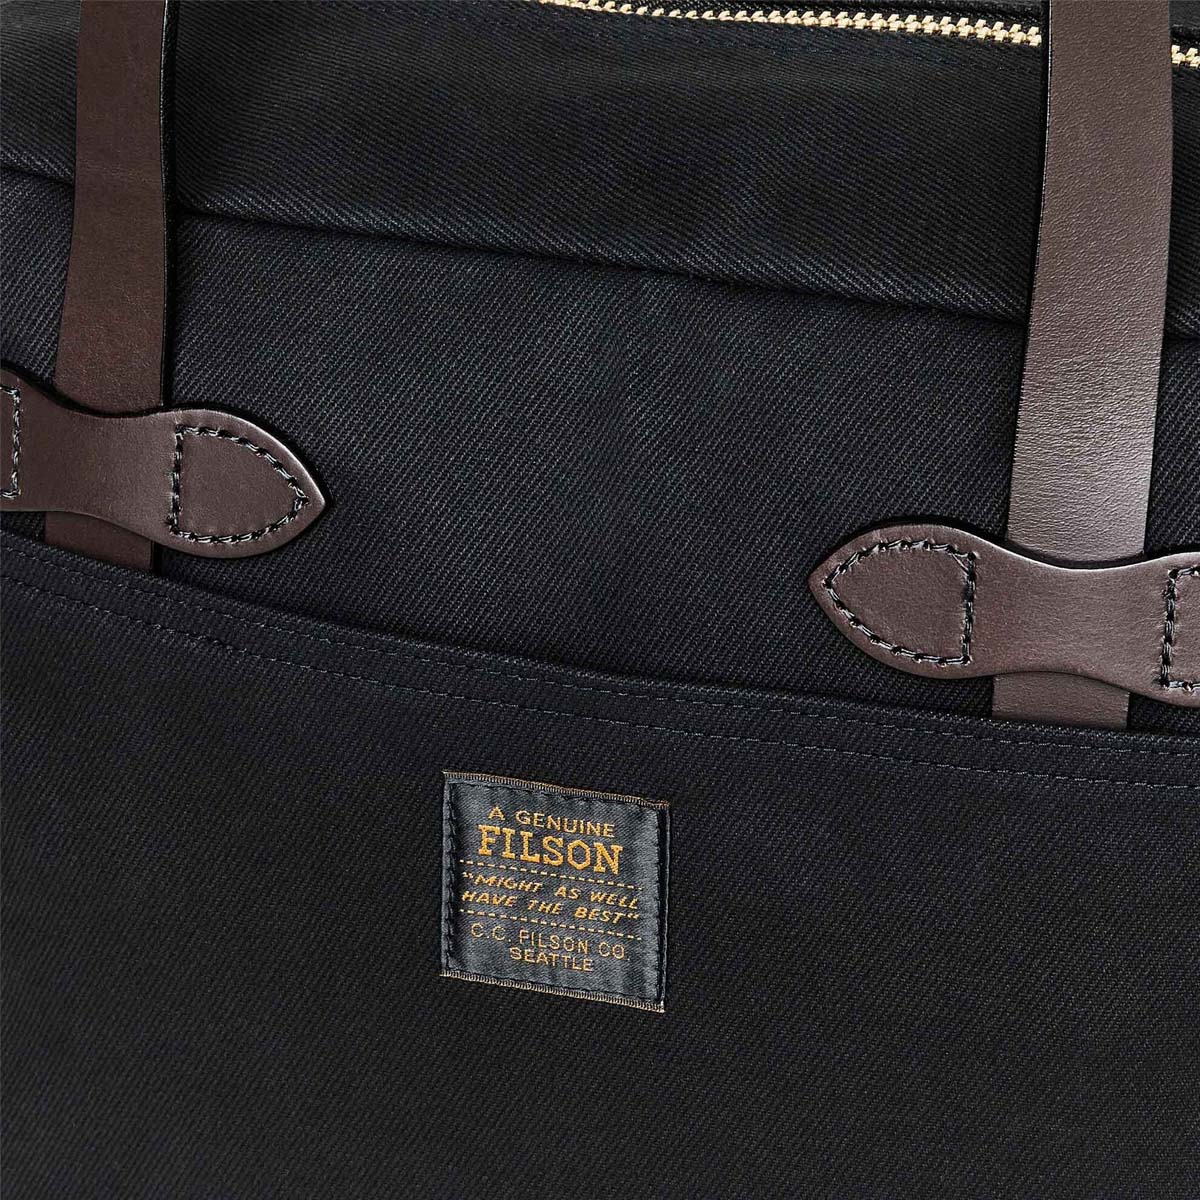 Filson Rugged Twill Tote Bag With Zipper Black, lifestyle